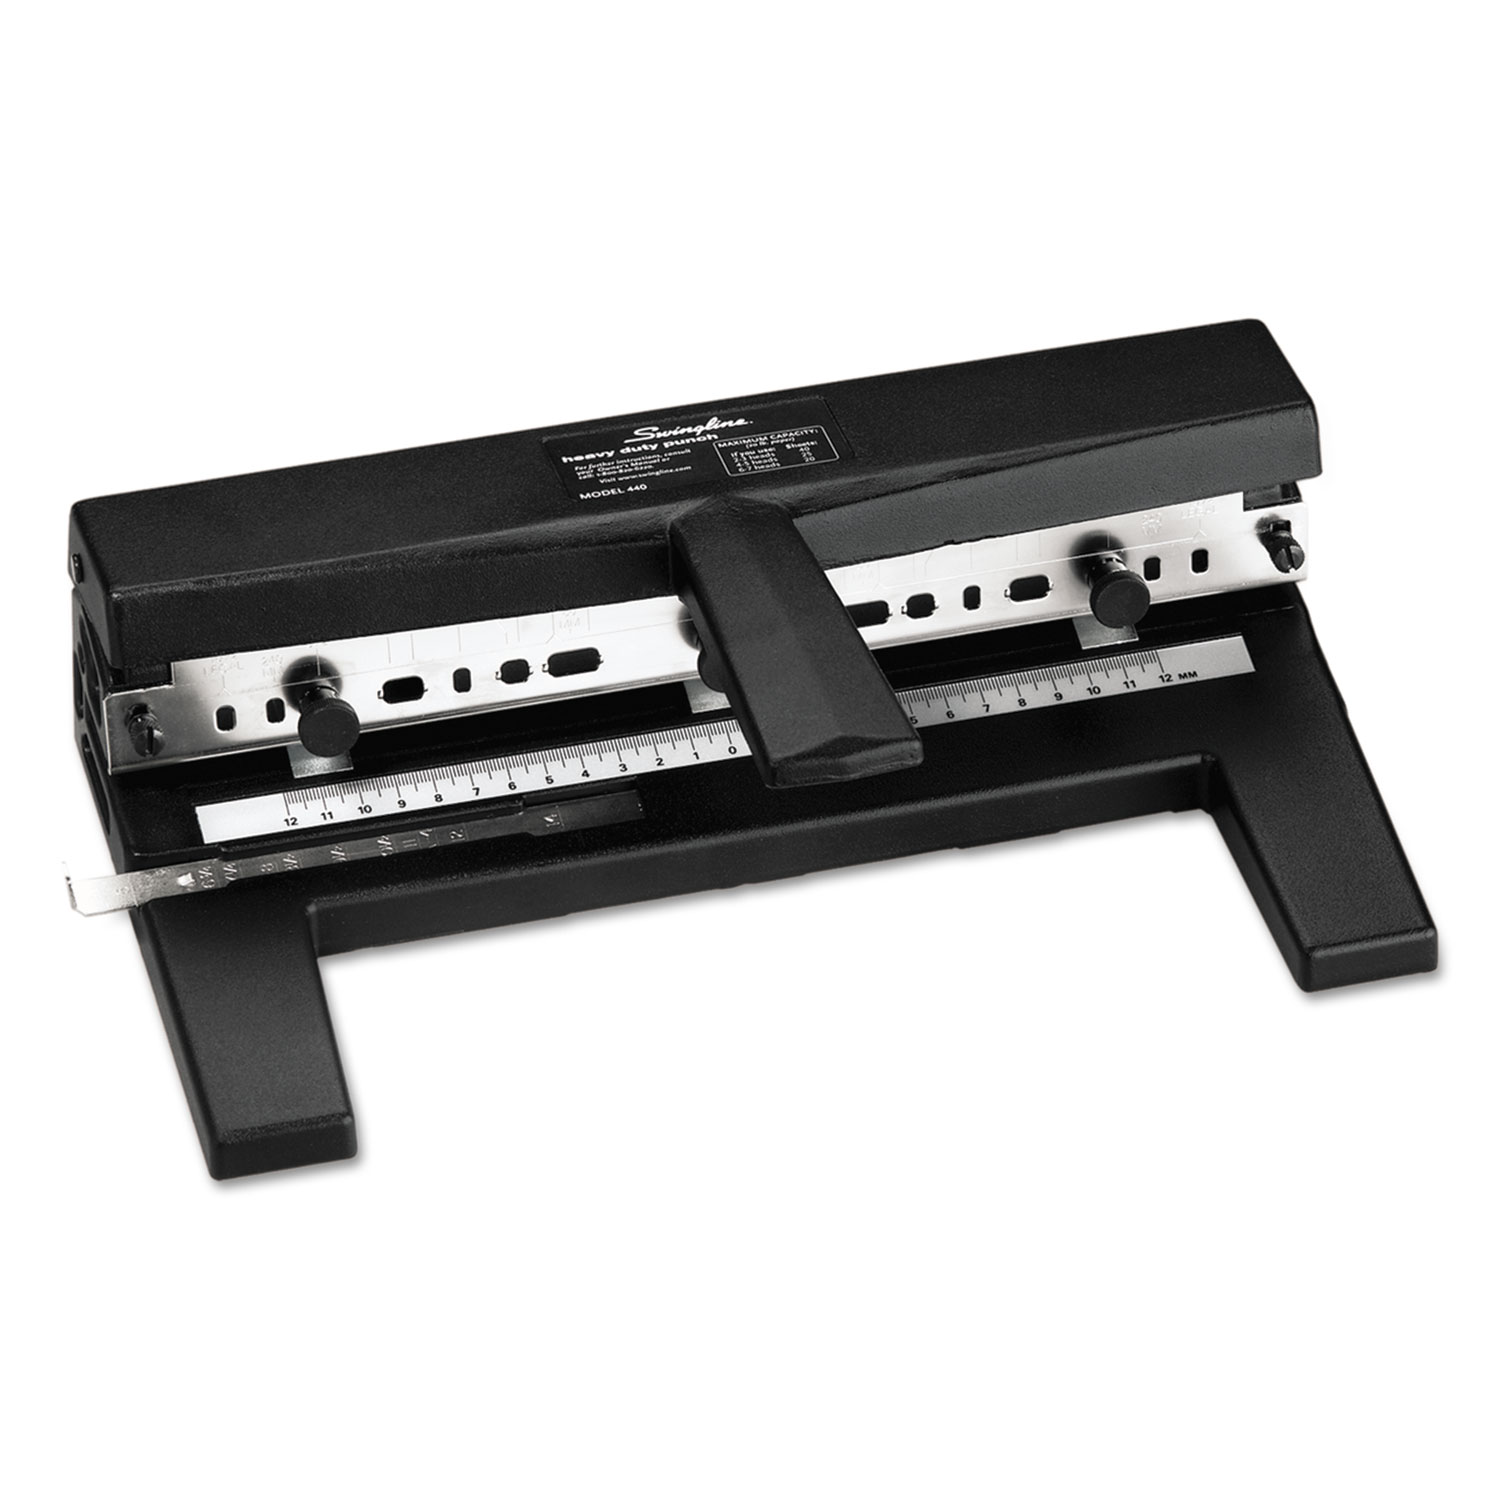 Swingline 28-Sheet Commercial Electric 3-Hole Punch, 9/32 Holes